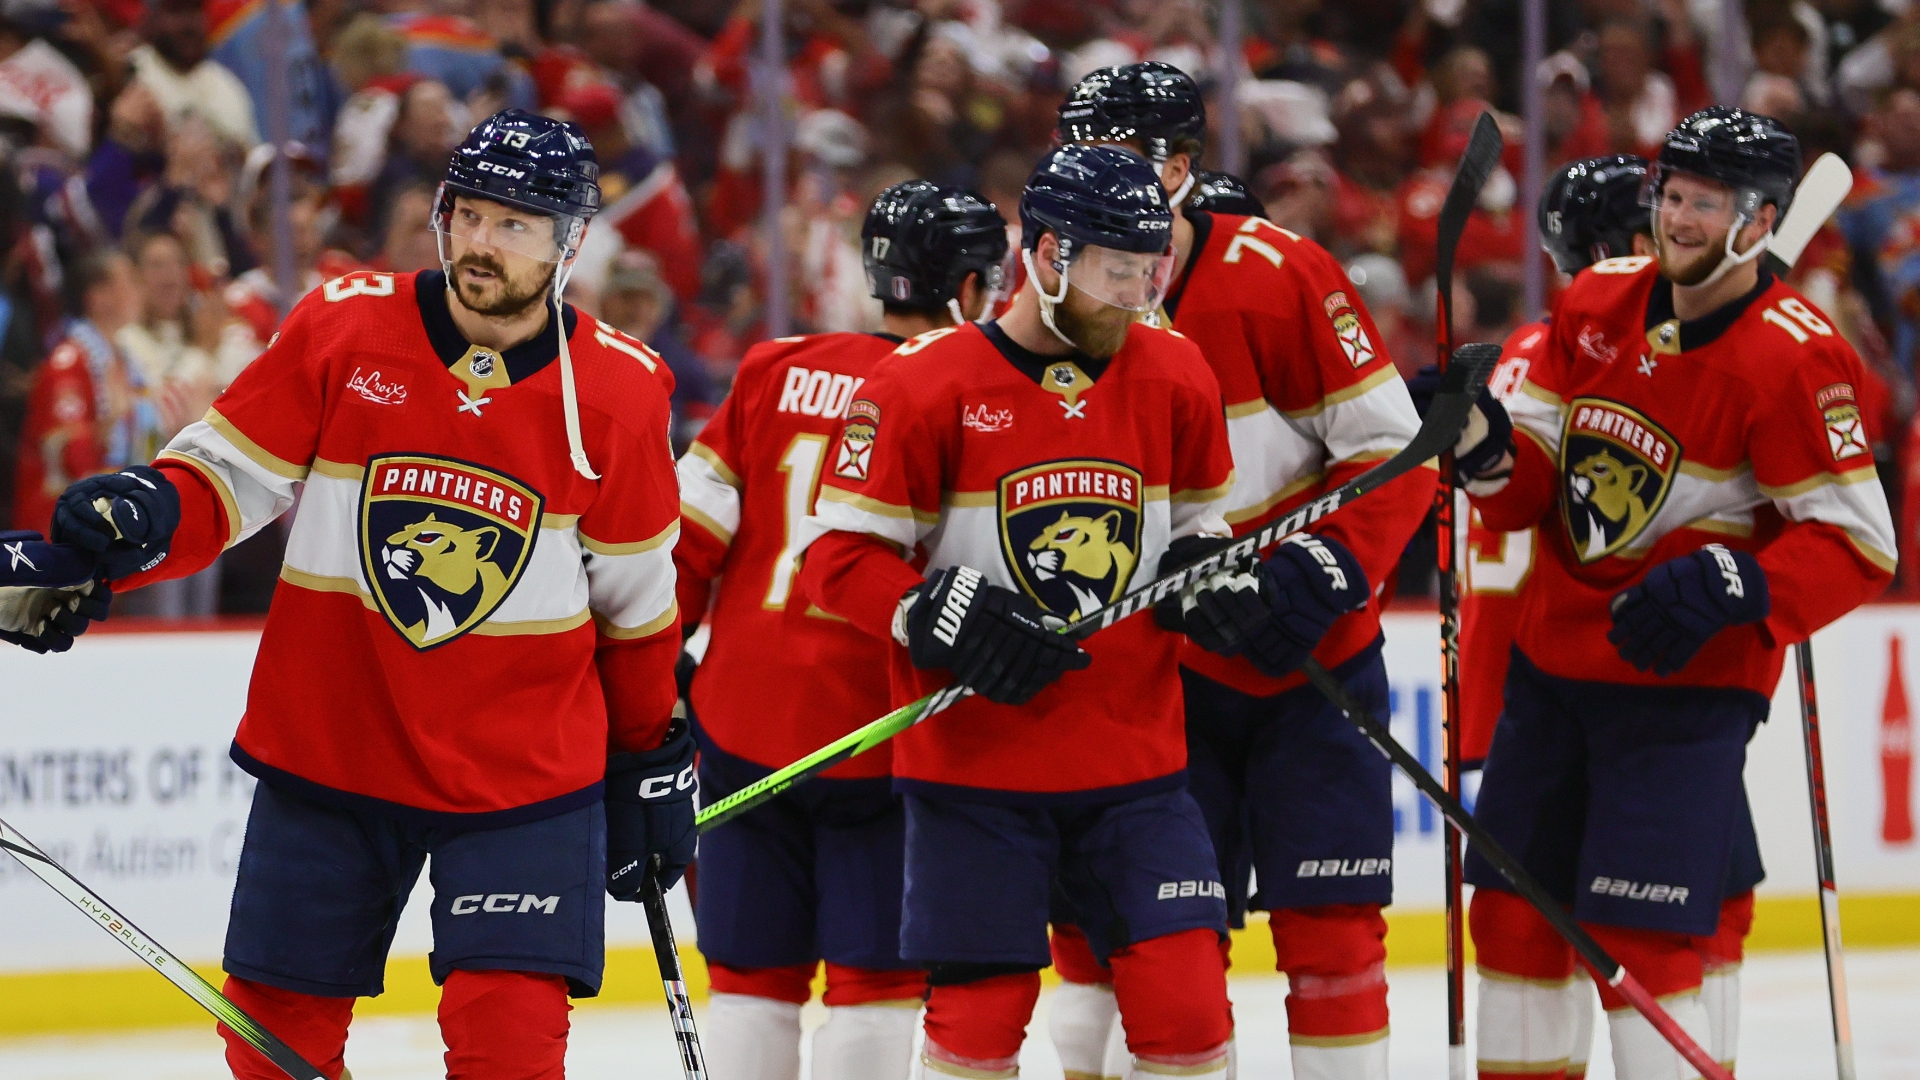 Panthers even up series with Rangers after thrilling OT win